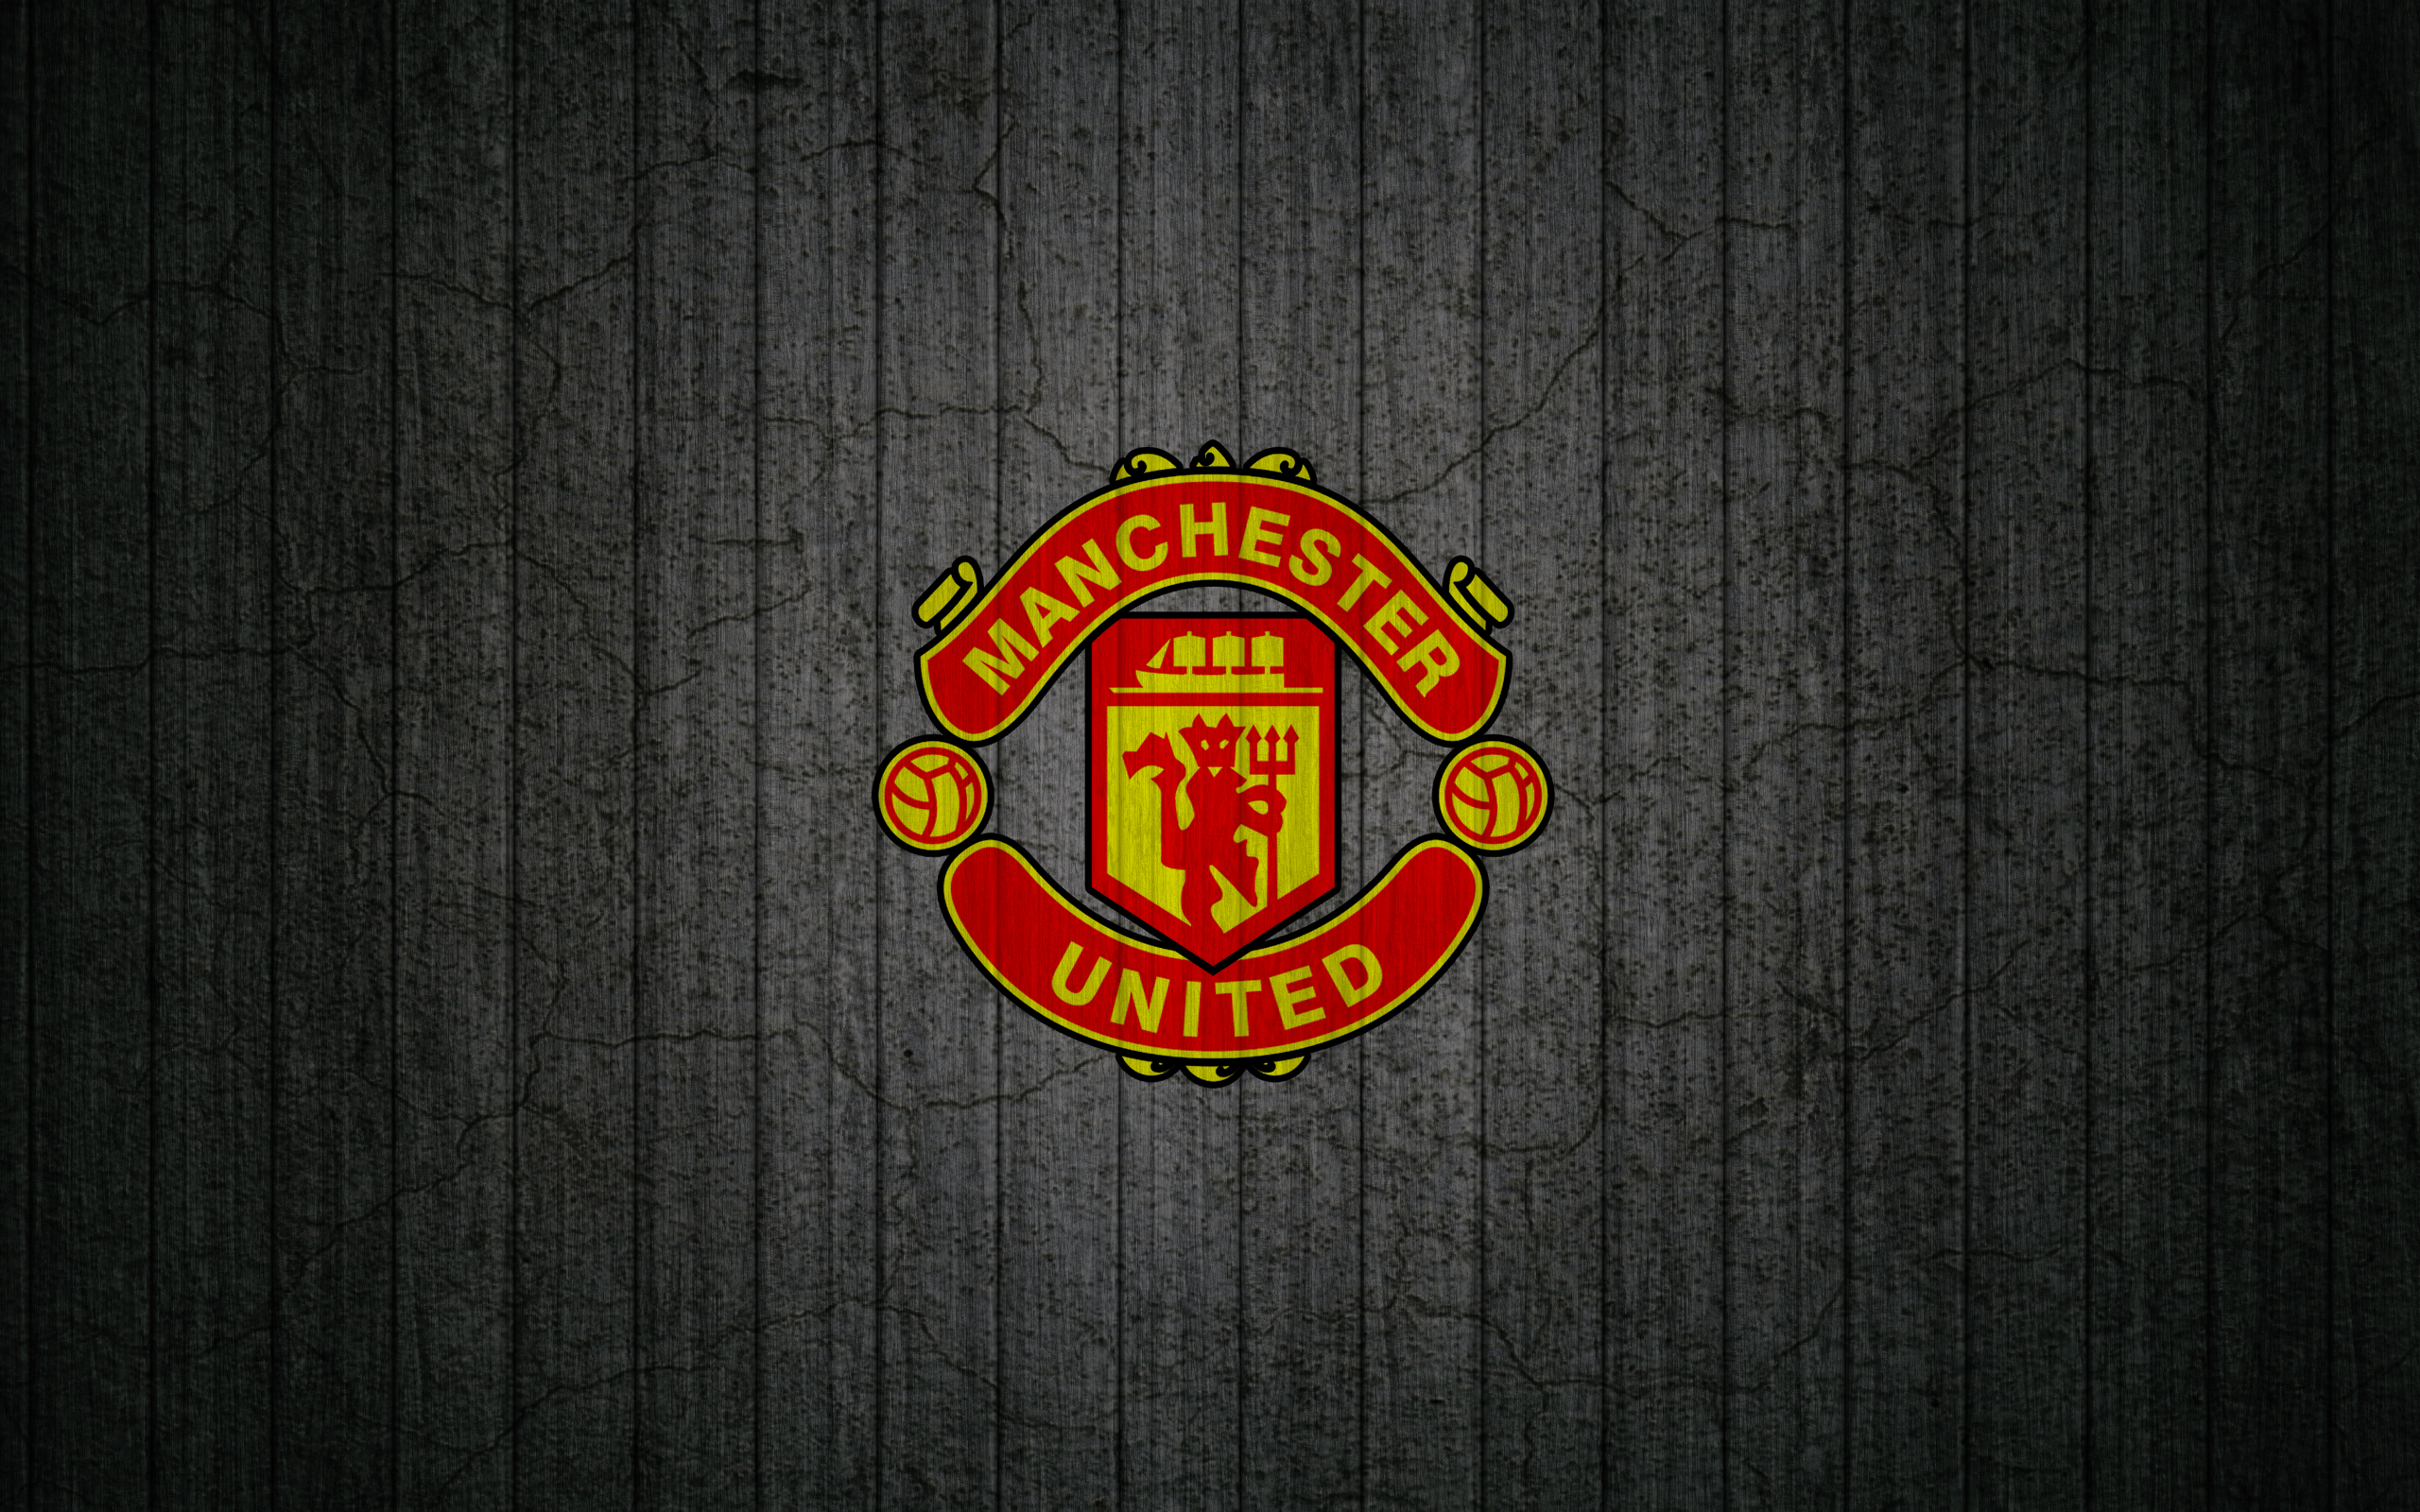 Here some logo's and teamphotos of Manchester United F.C